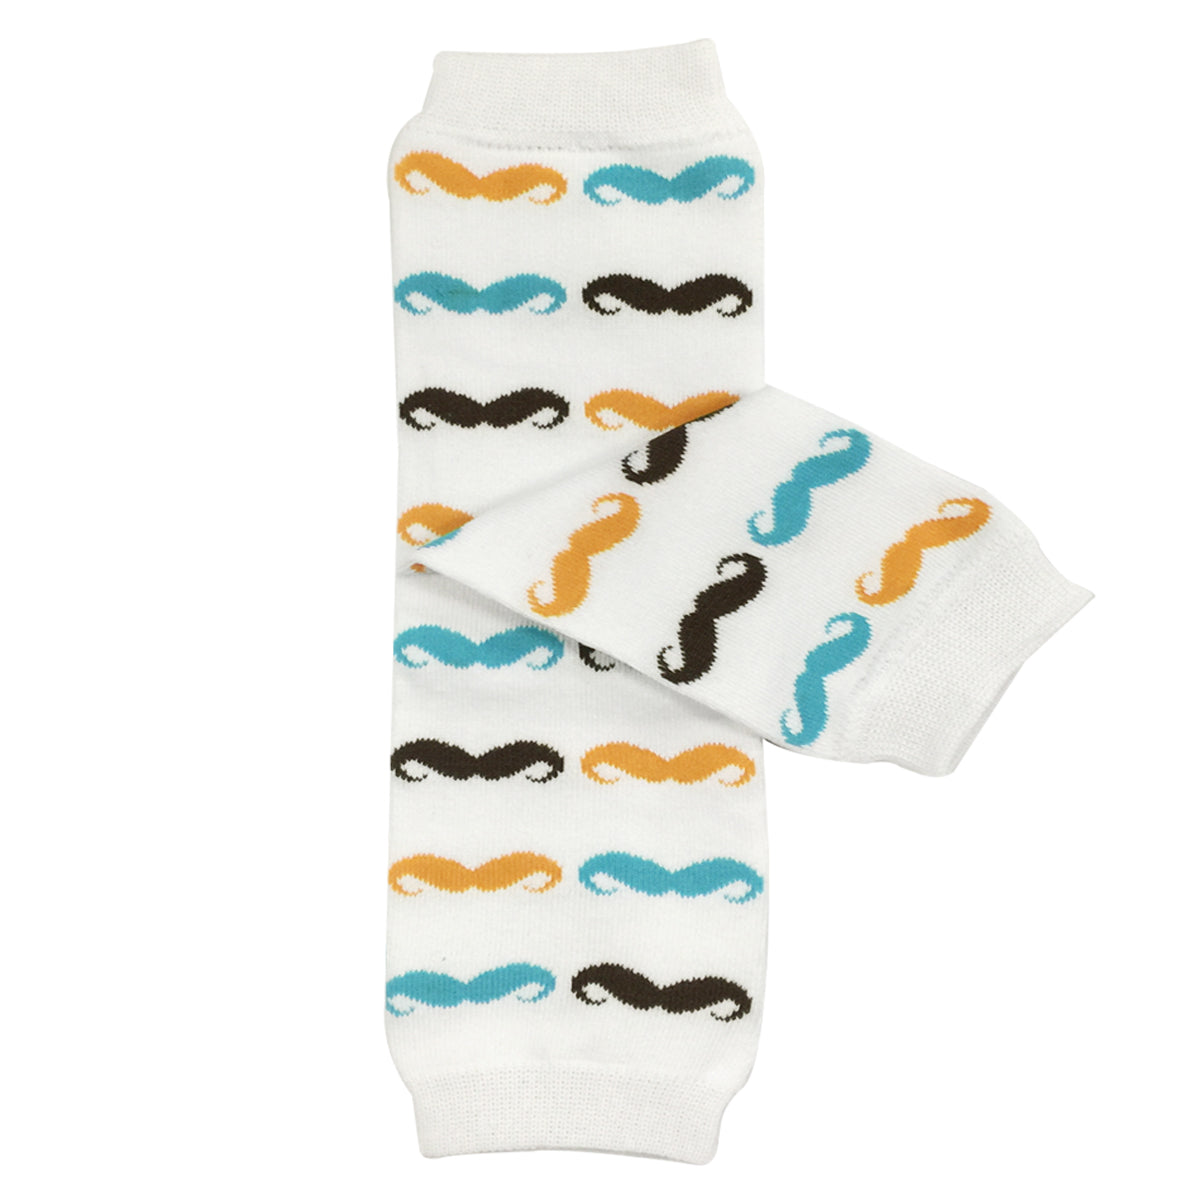 Wrapables Colorful Baby Leg Warmers 1